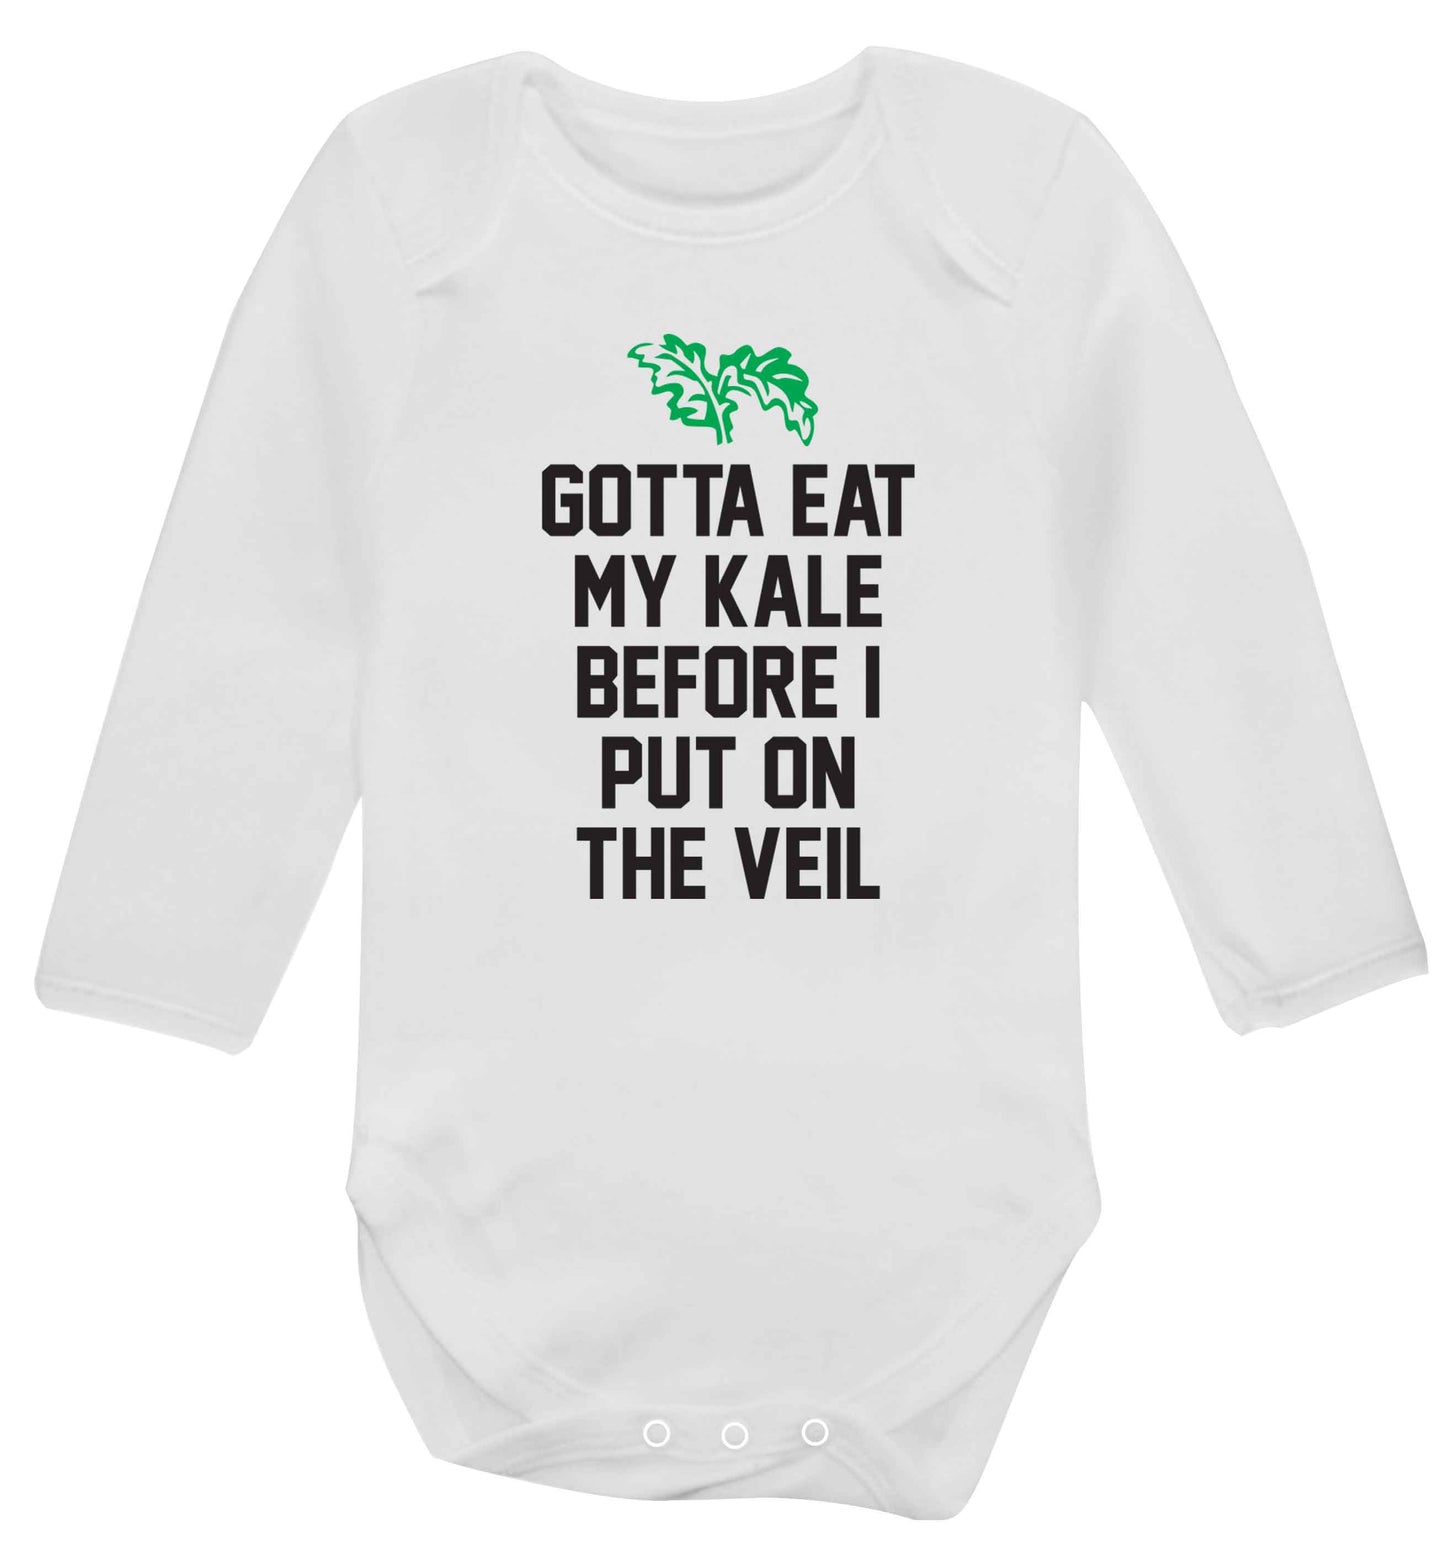 Gotta eat my kale before I put on the veil Baby Vest long sleeved white 6-12 months